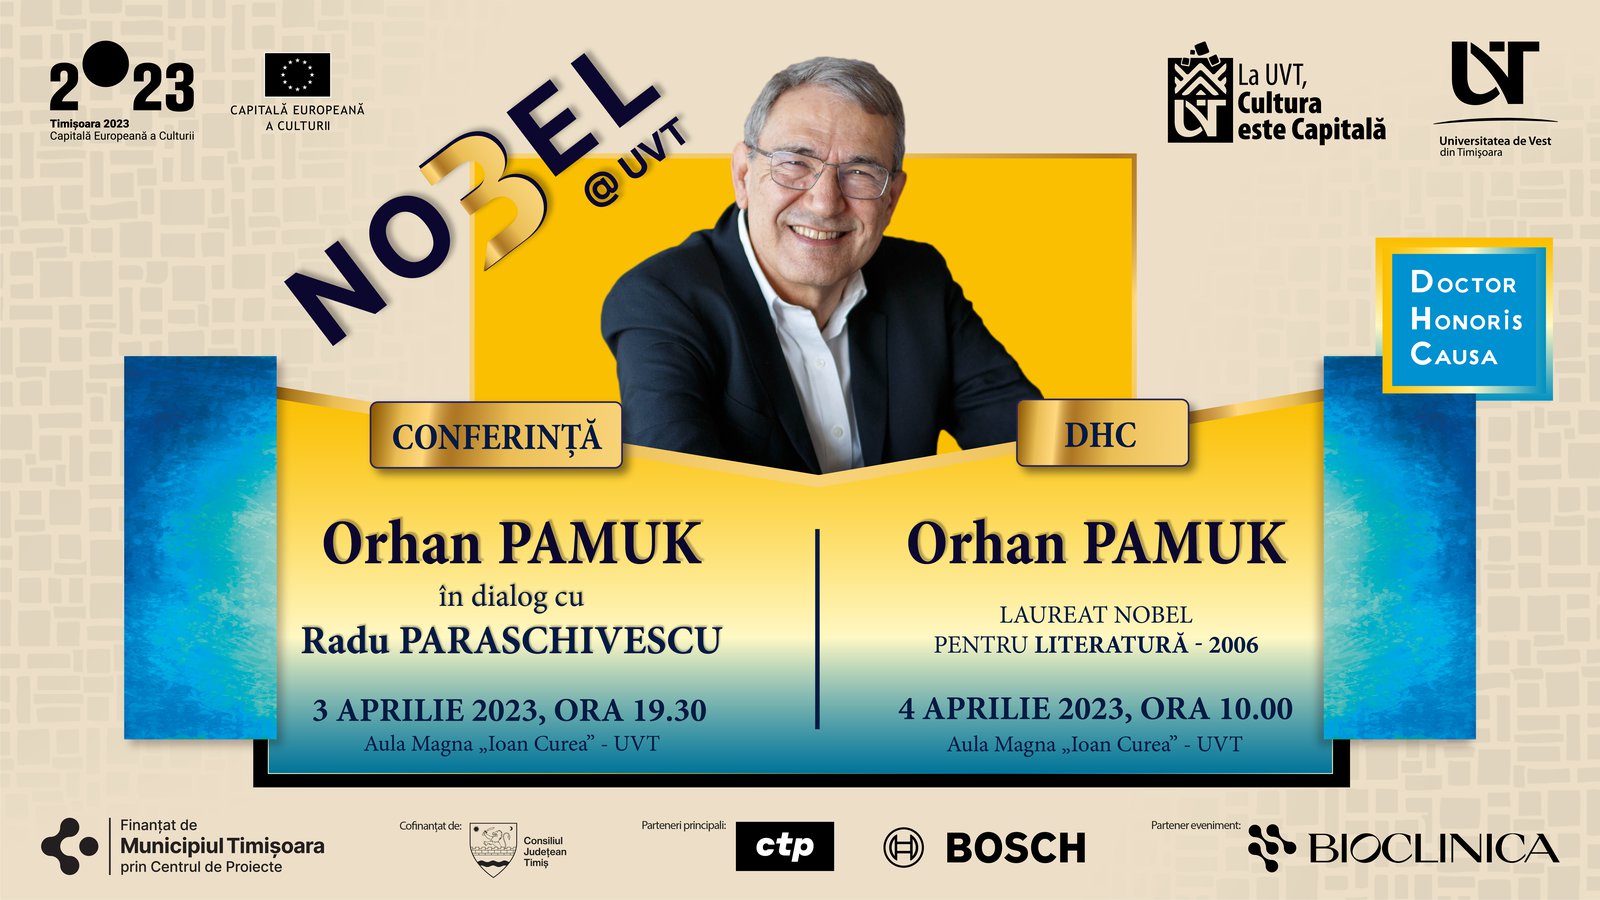 Public Conference and DHC Ceremony - ORHAN PAMUK, April 3, 2023